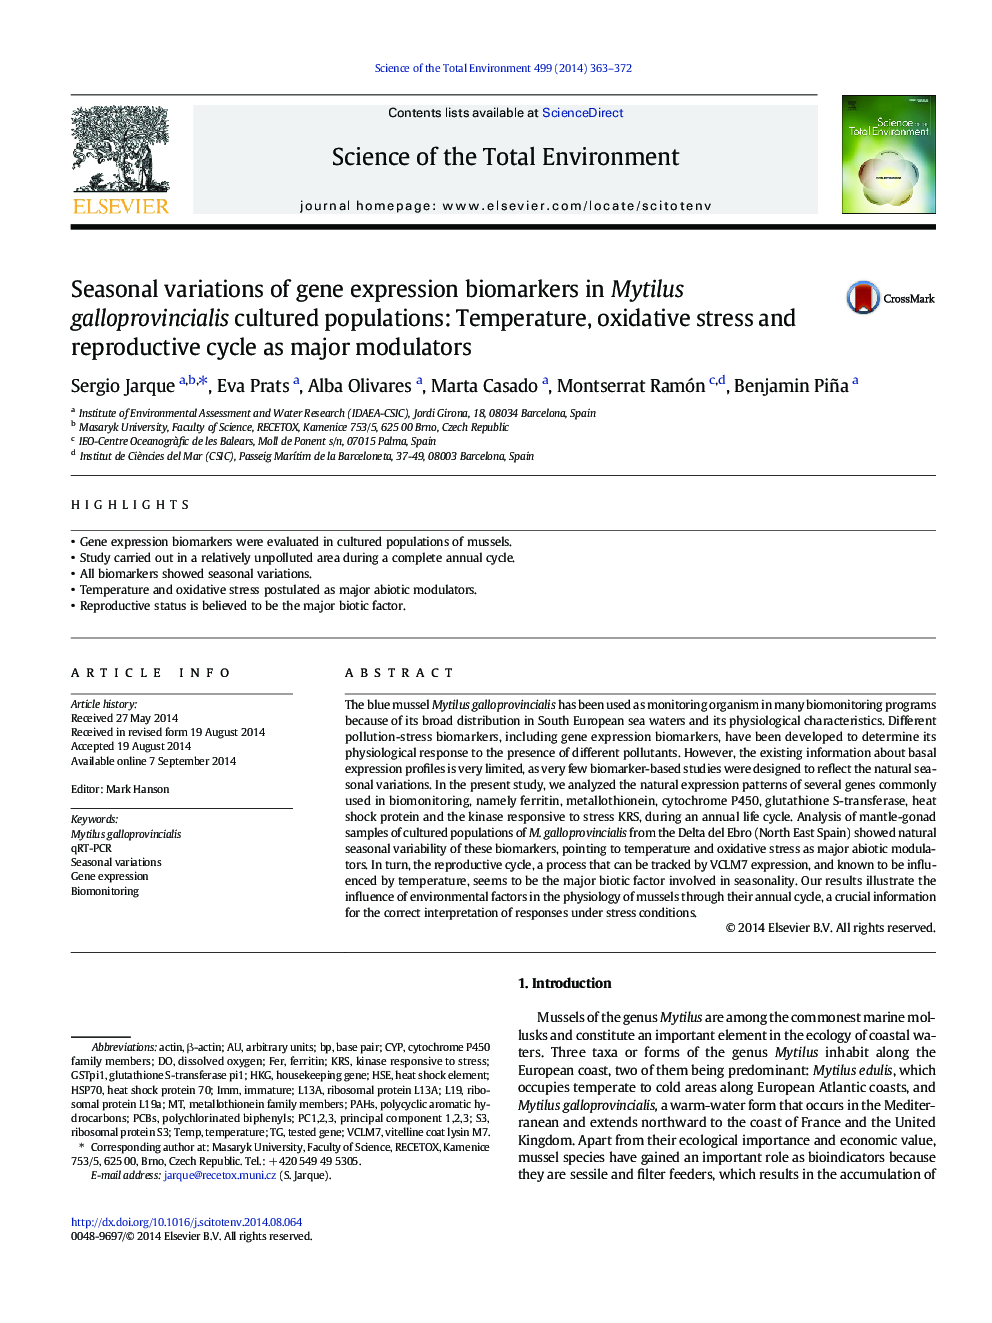 Seasonal variations of gene expression biomarkers in Mytilus galloprovincialis cultured populations: Temperature, oxidative stress and reproductive cycle as major modulators